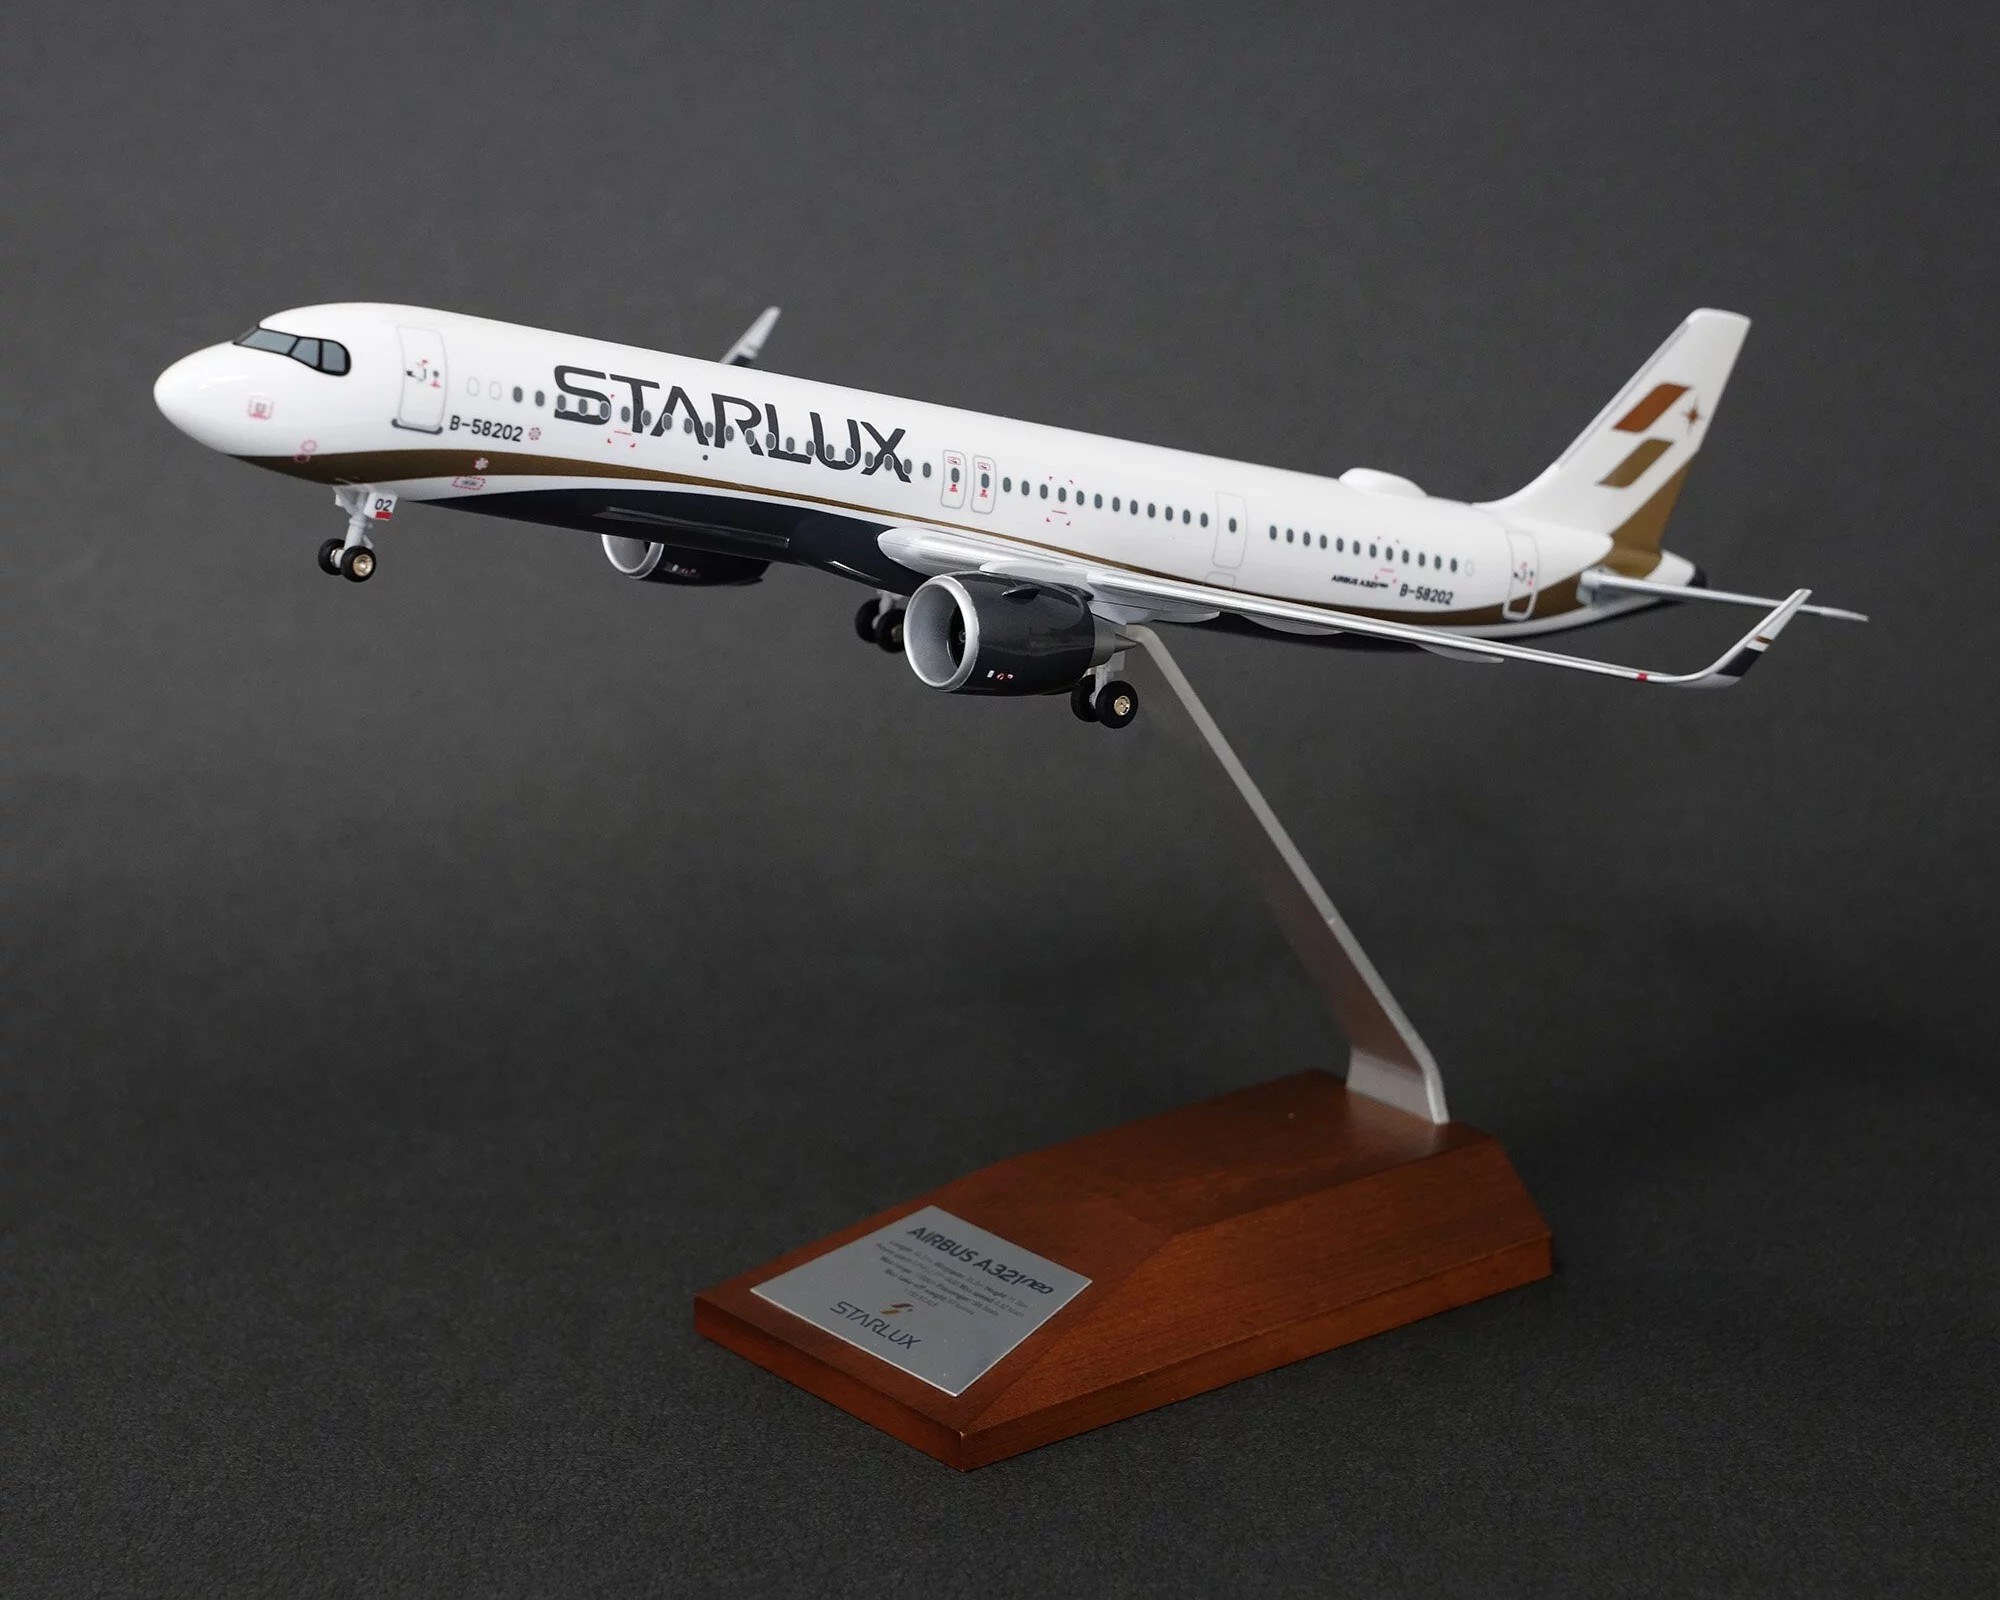 LGZ000004　STARLUX Airlines A321neo 1:150